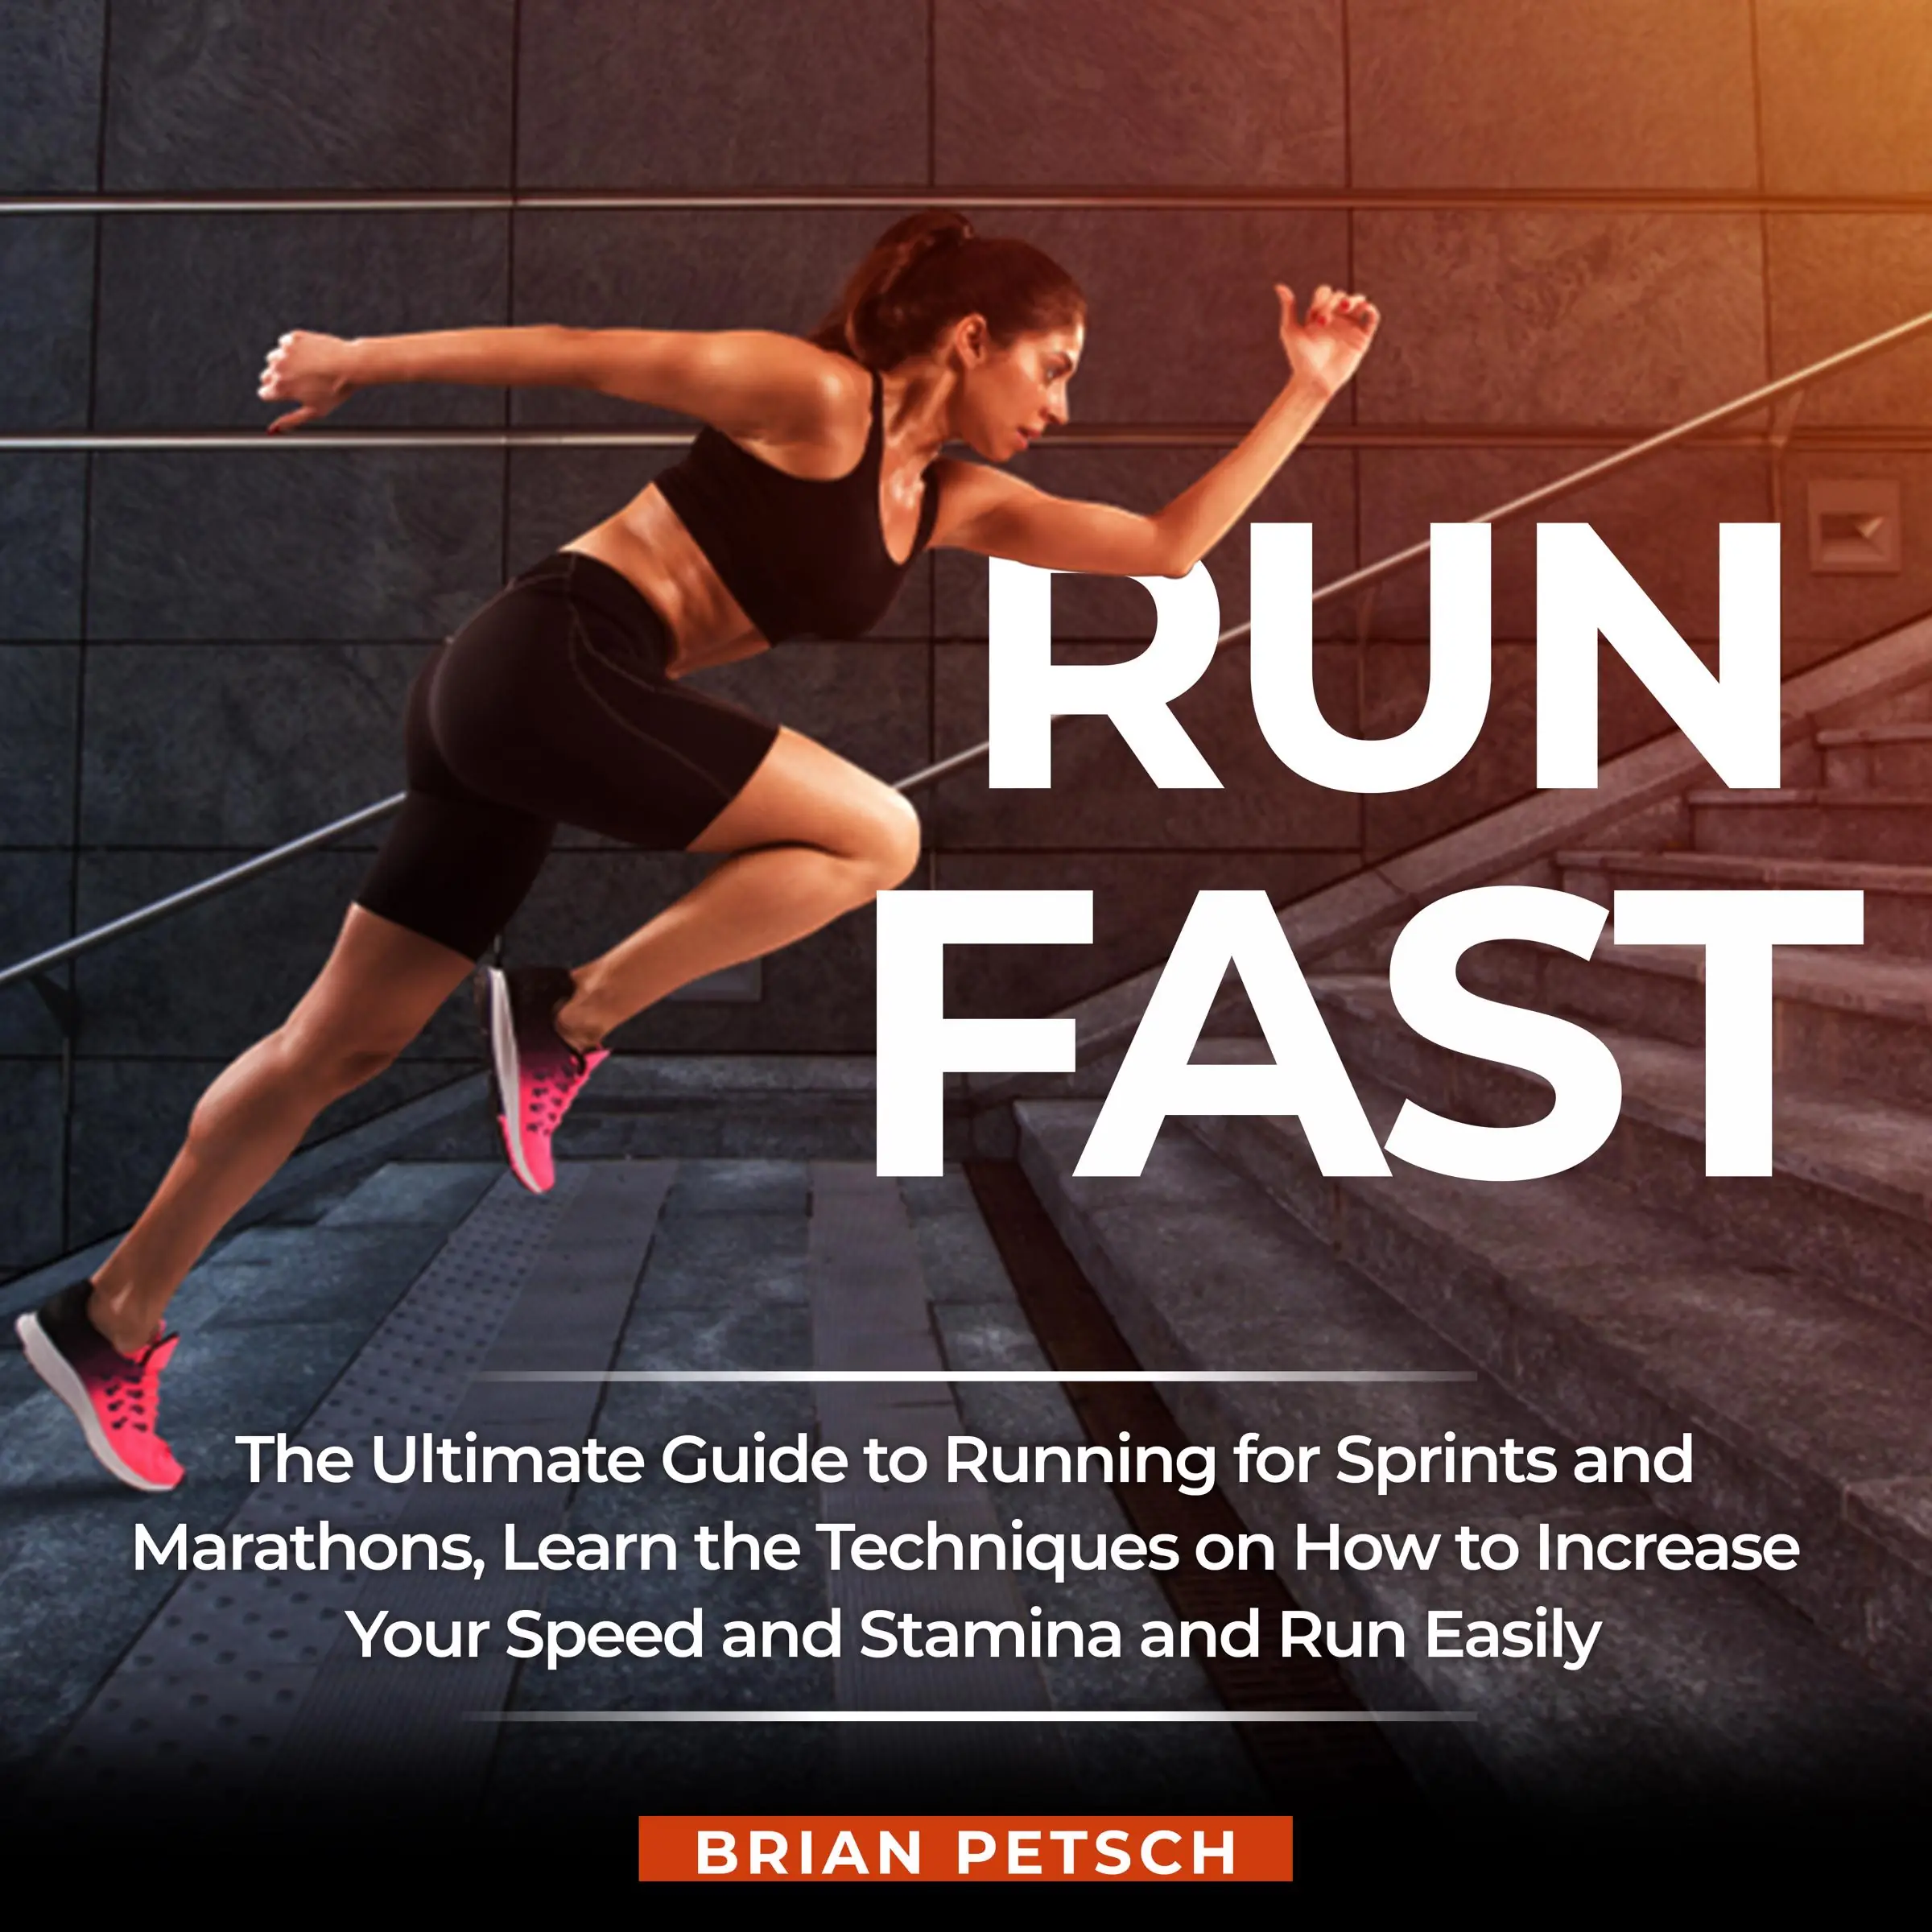 Run Fast: The Ultimate Guide to Running for Sprints and Marathons, Learn the Techniques on How to Increase Your Speed and Stamina and Run Easily Audiobook by Brian Petsch